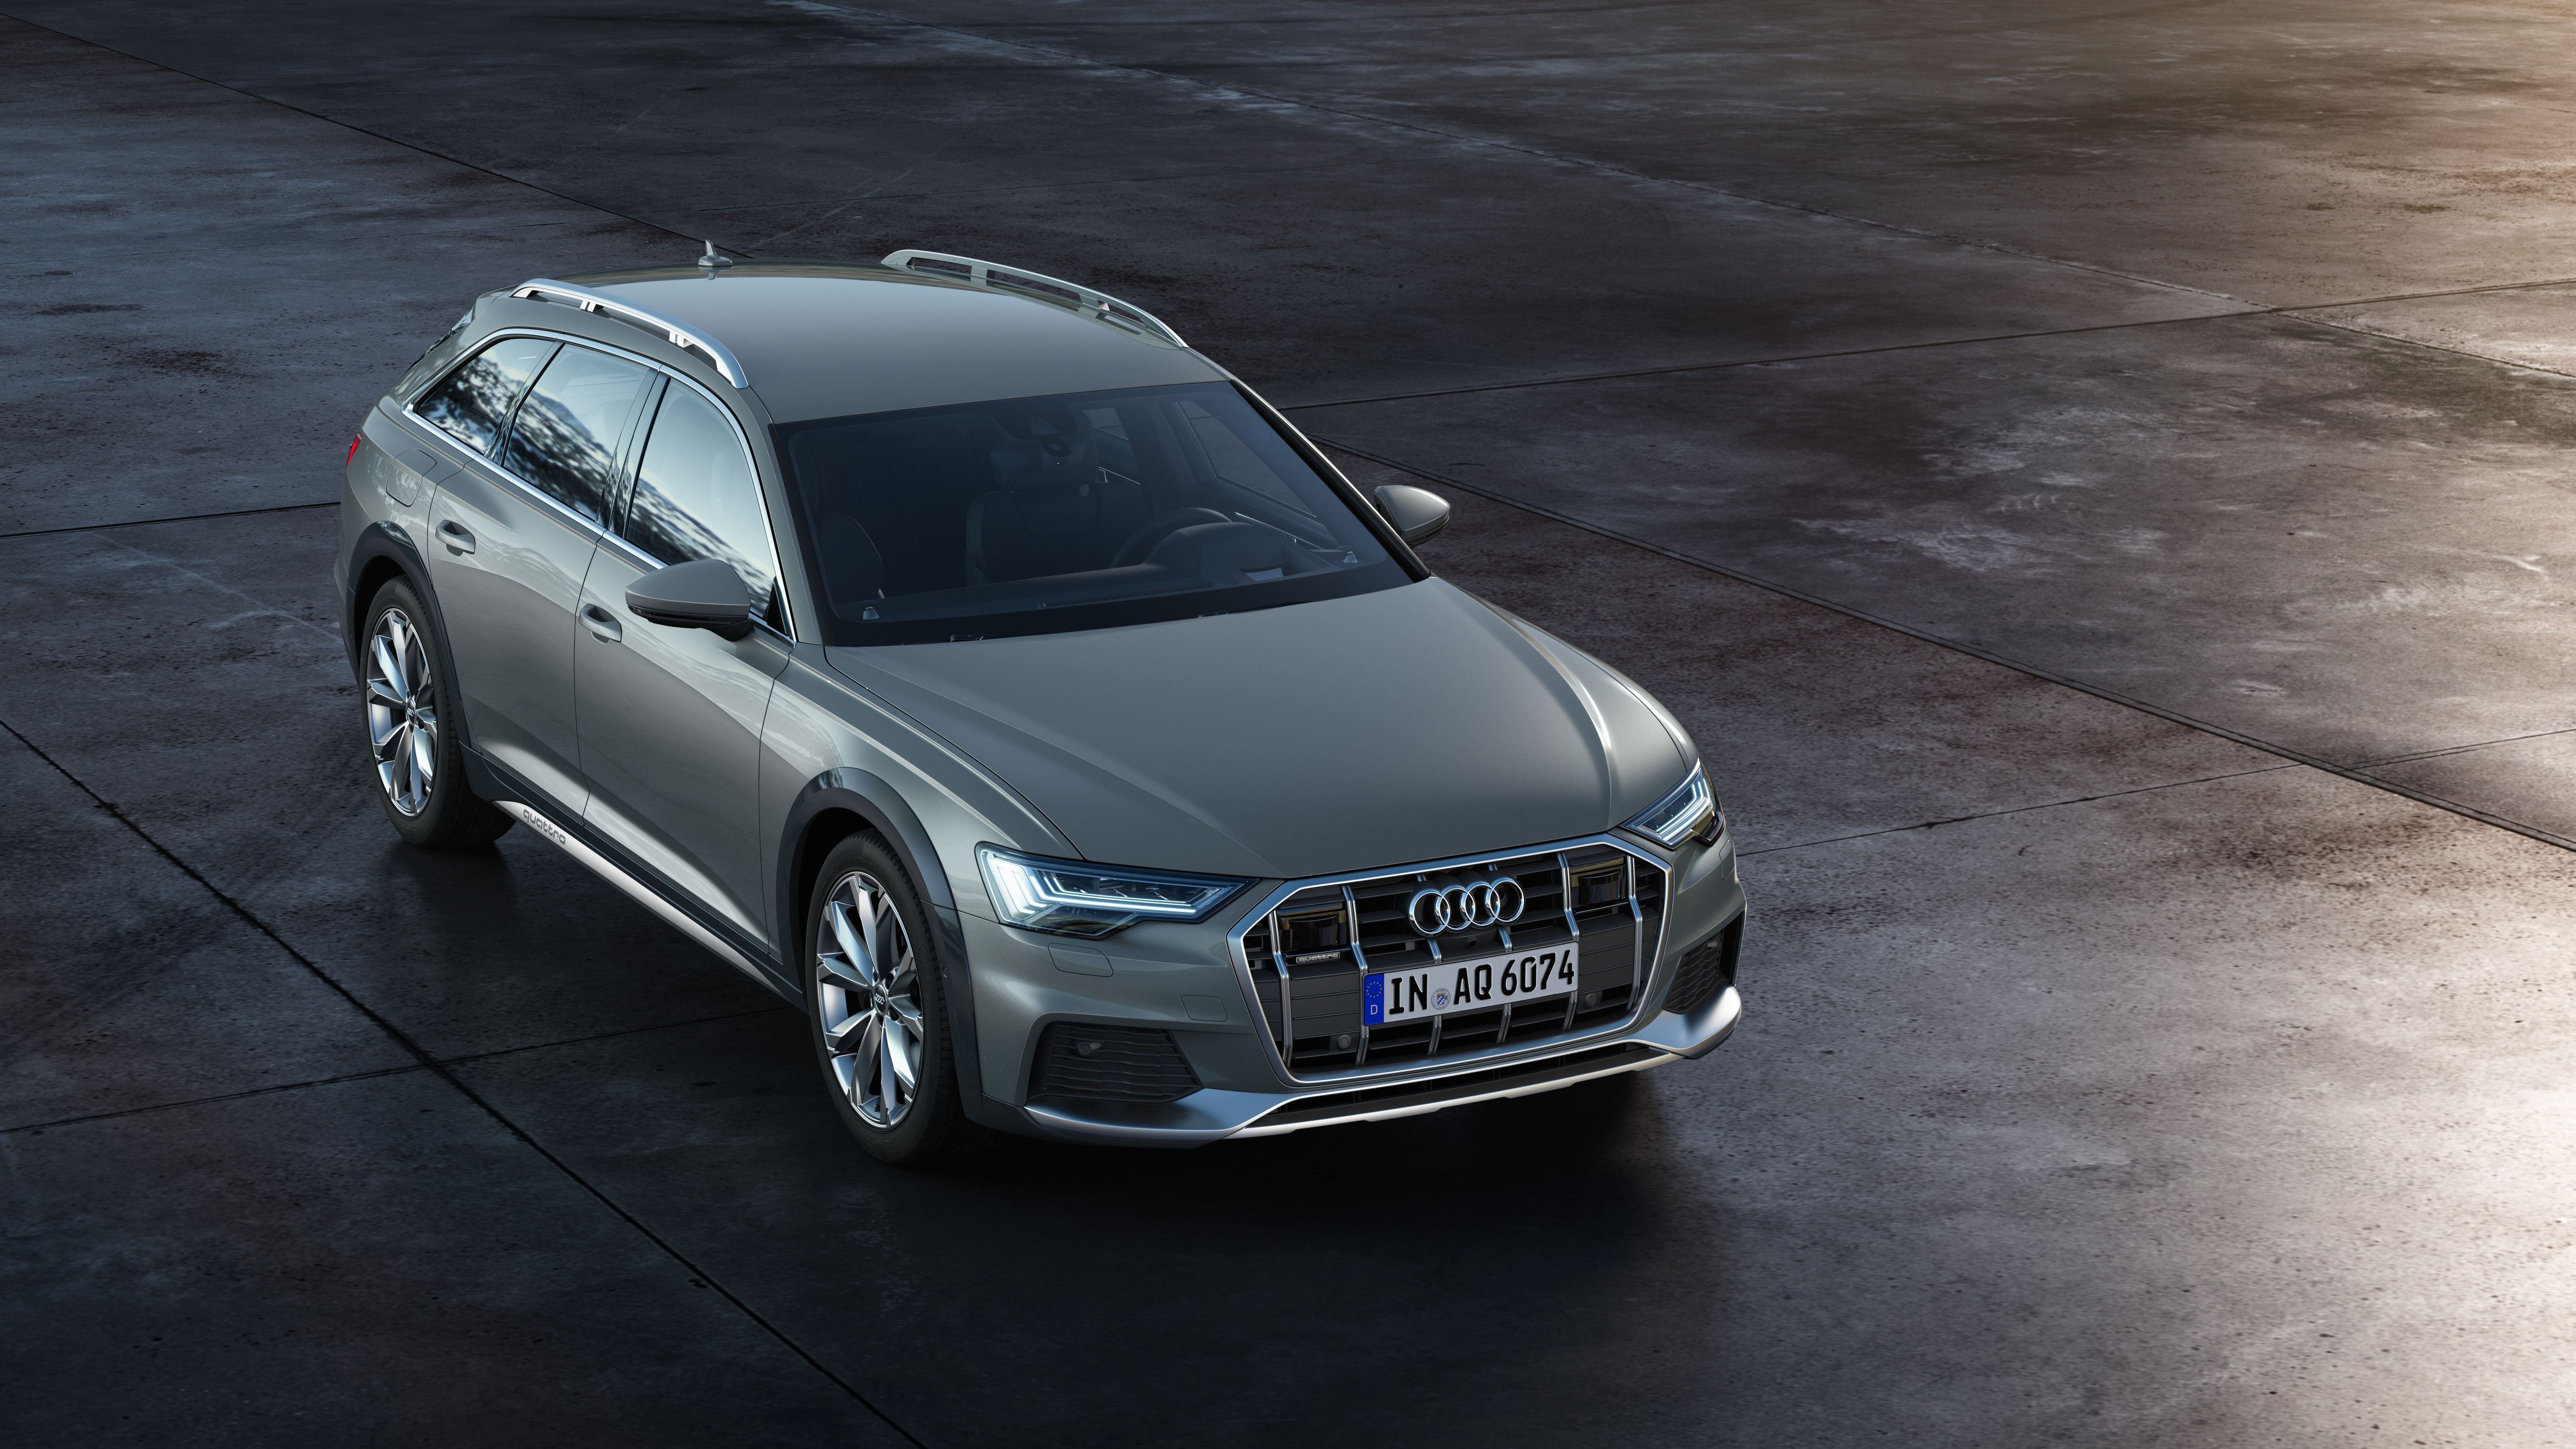 2019 The new Audi A6 allroad quattro was revealed just in time for its 20th anniversary